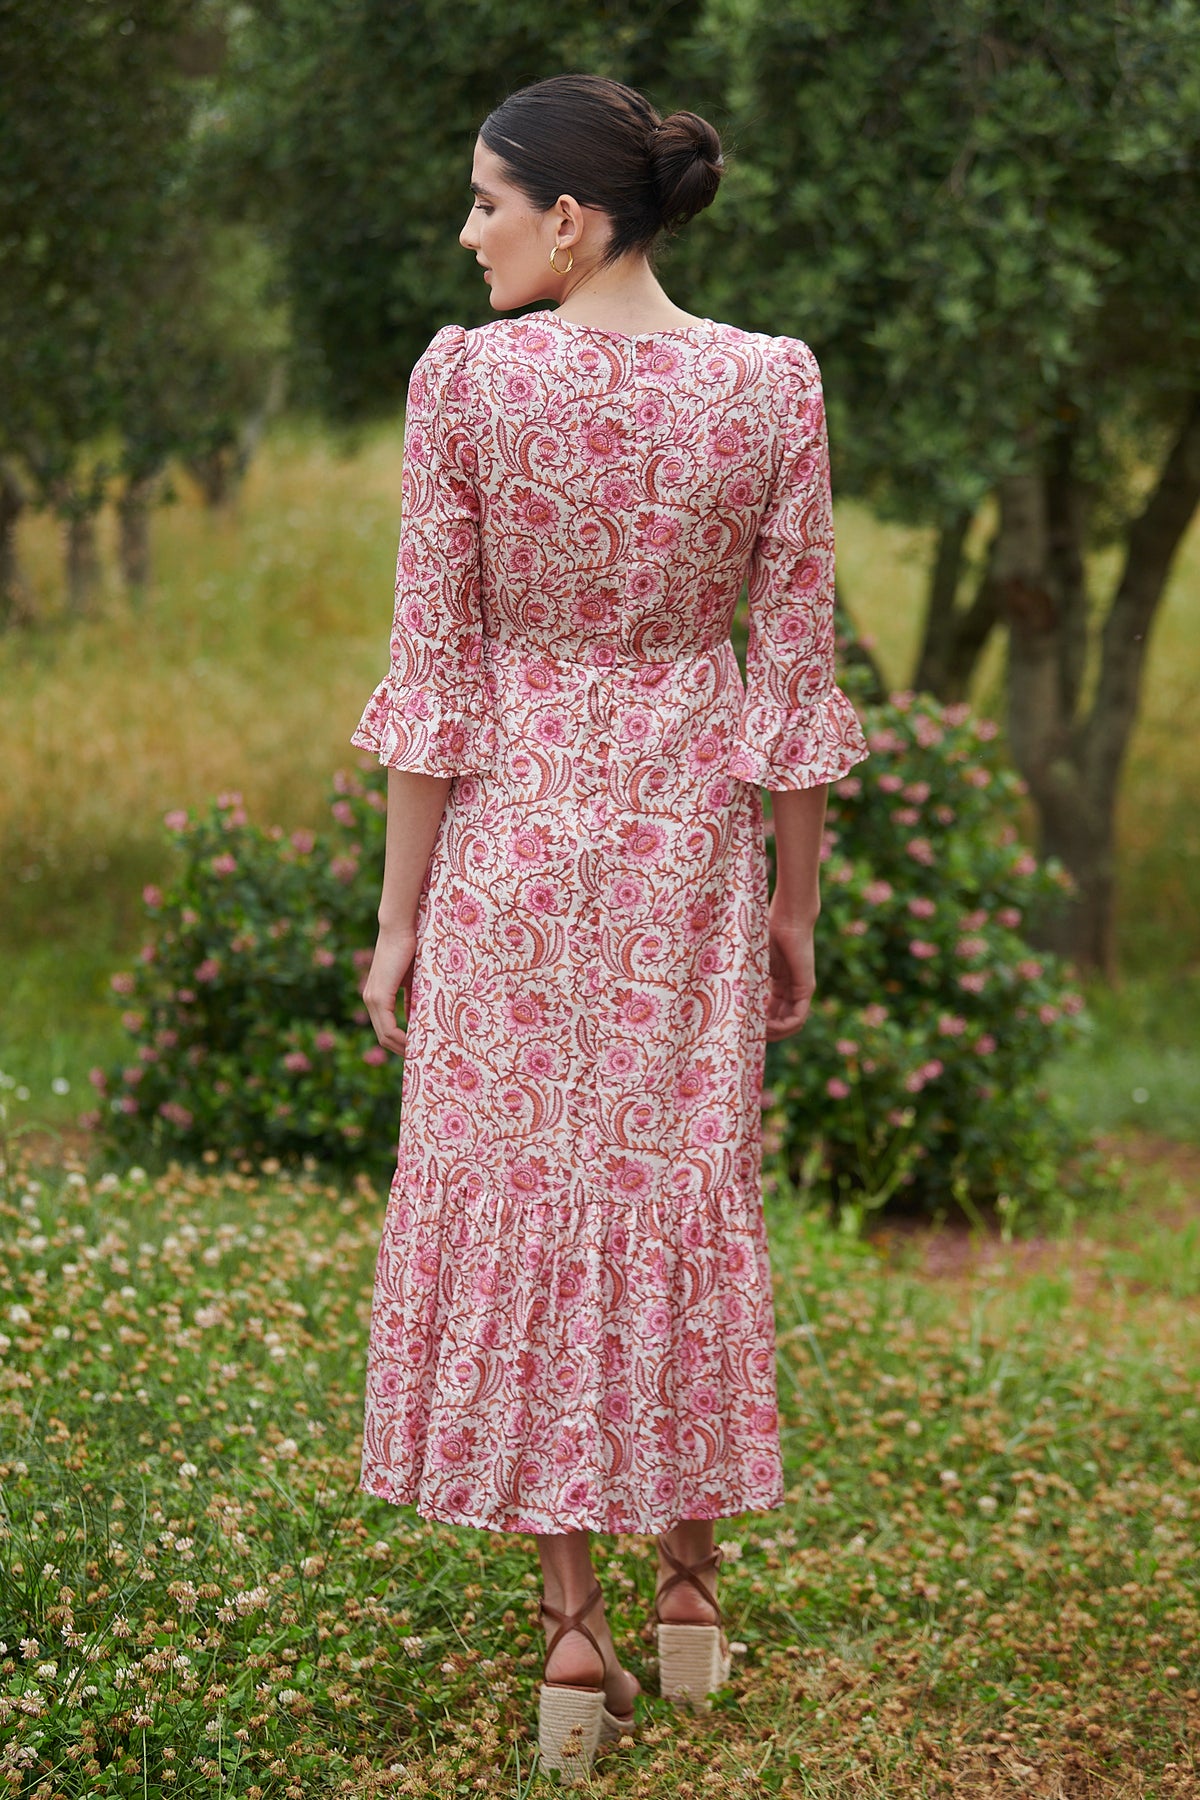 Pink floral midi dress with slash neckline three quarter sleeves with ruffle detail empire line and deep ruffle hem